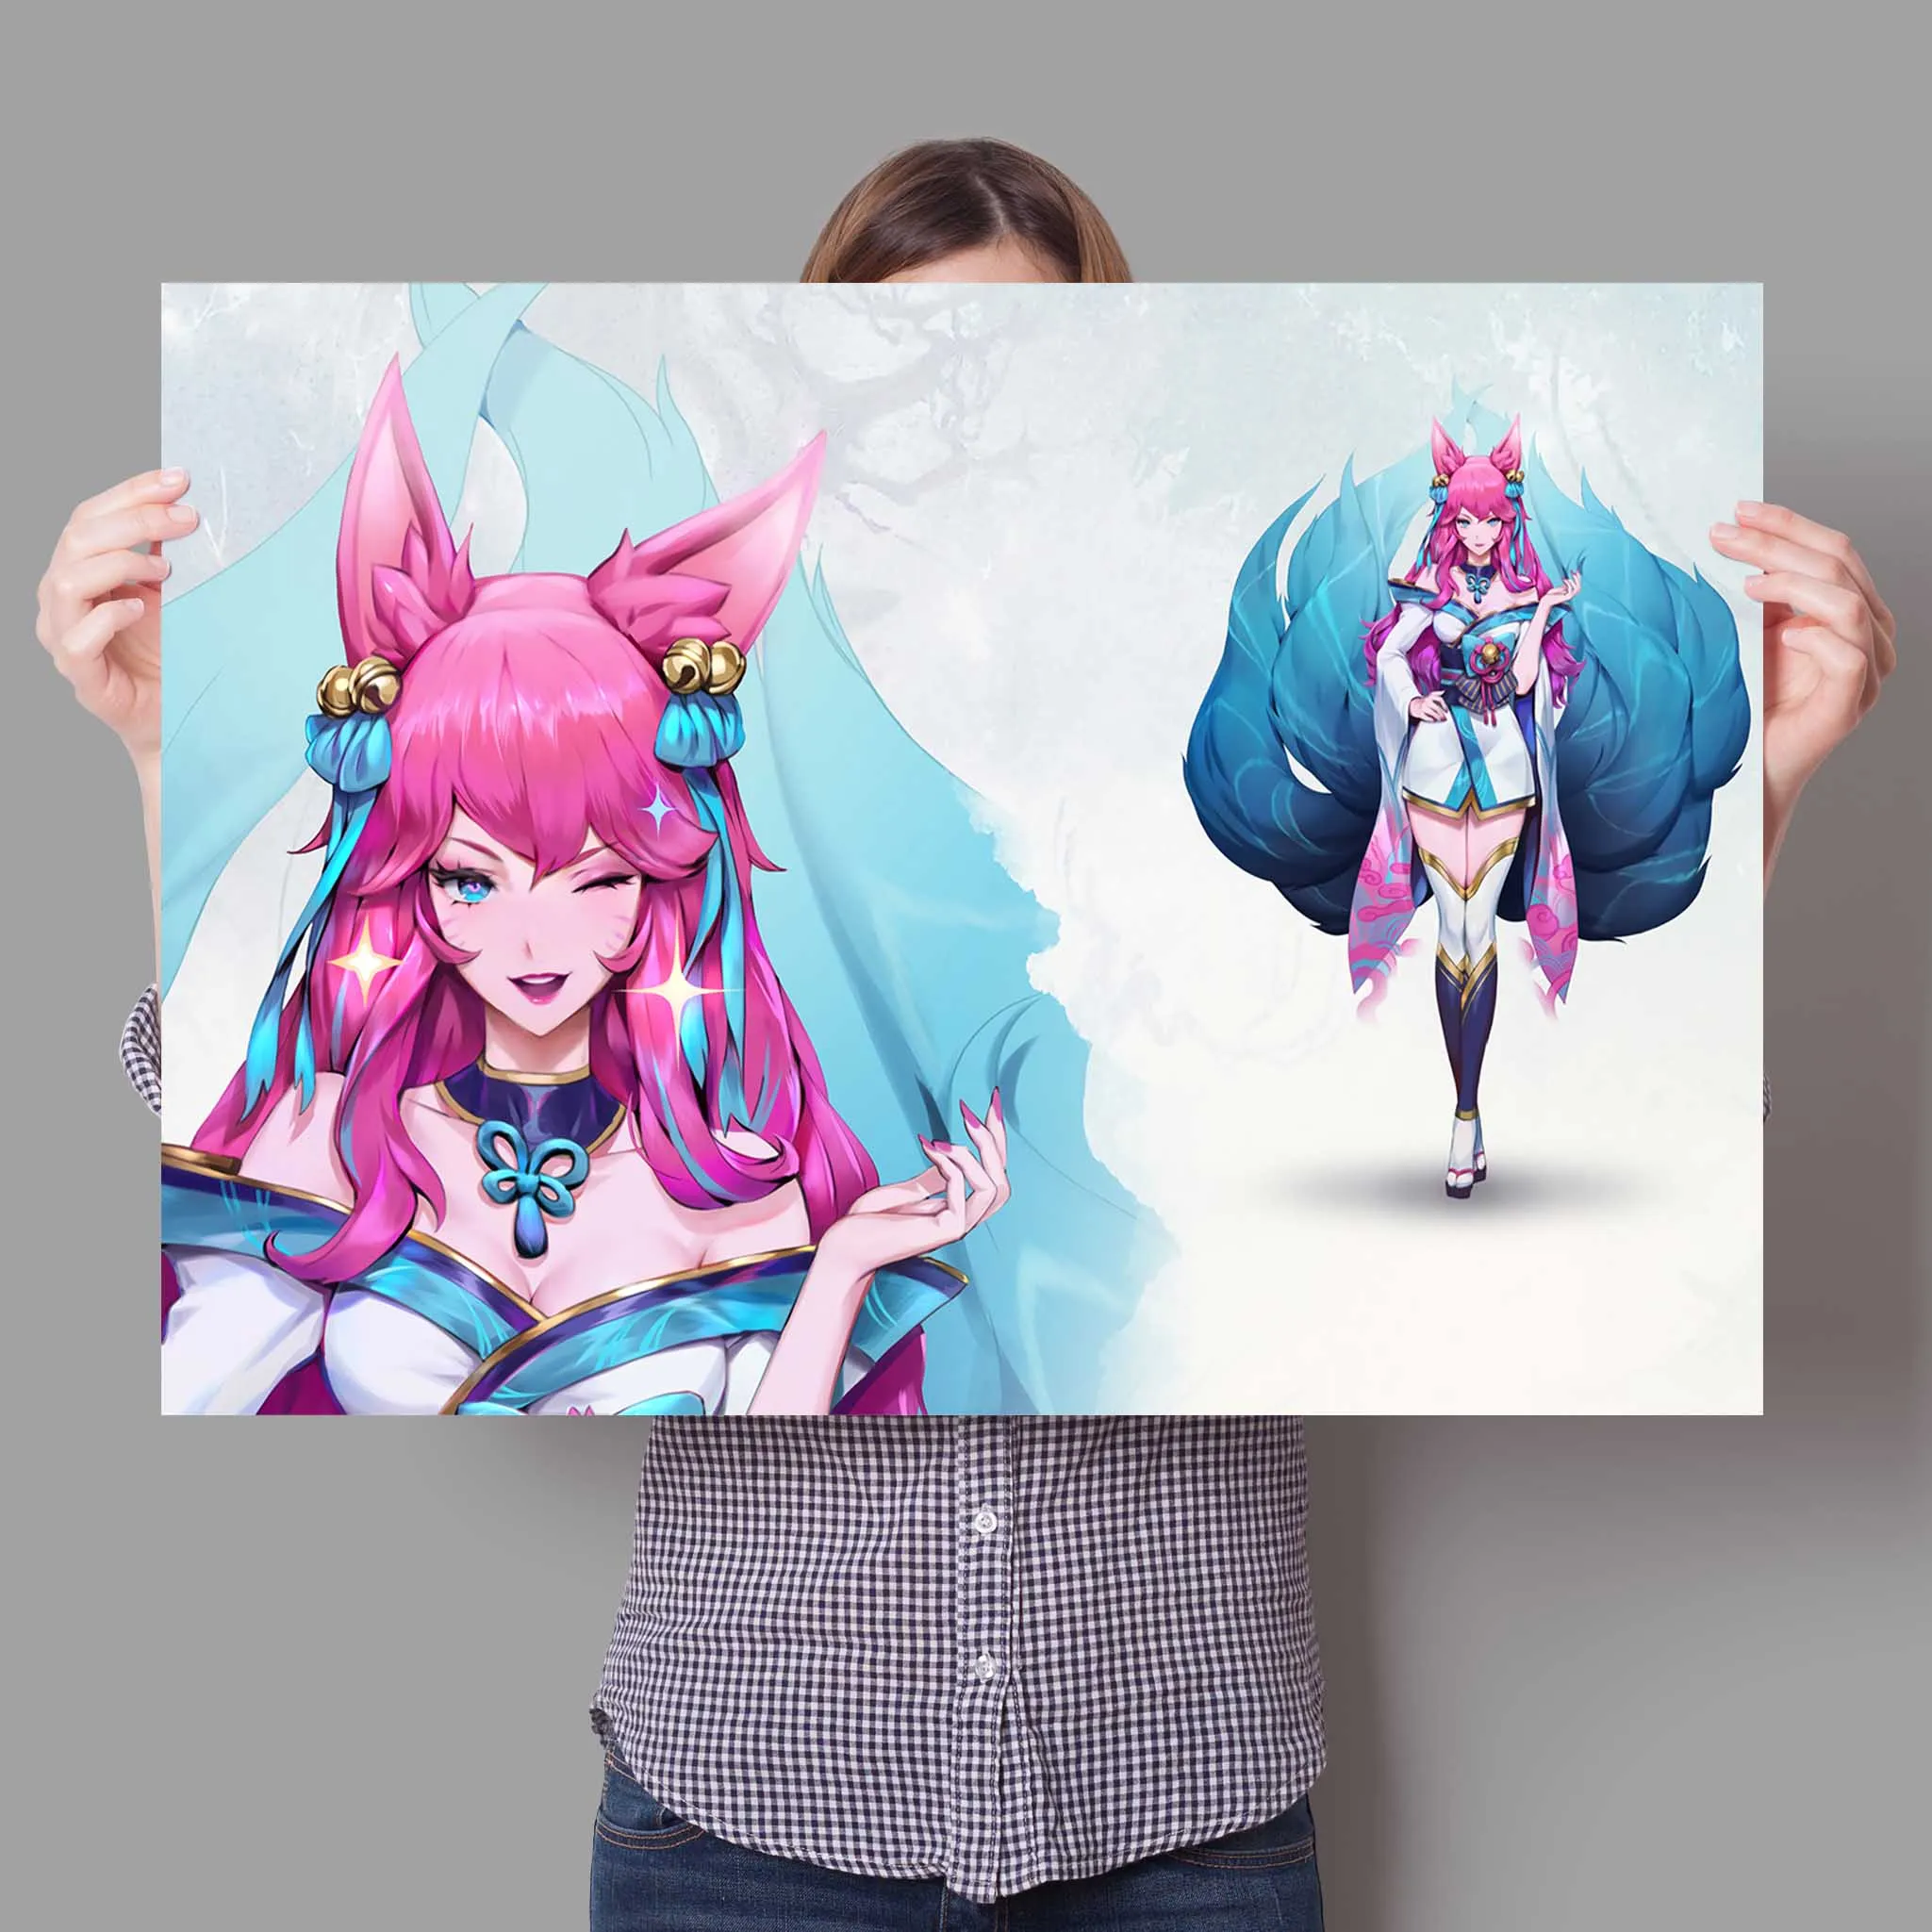 Popularna gra League of Legends latest skin soul lotus series HD poster home wall painting decoration Japanese manga style home